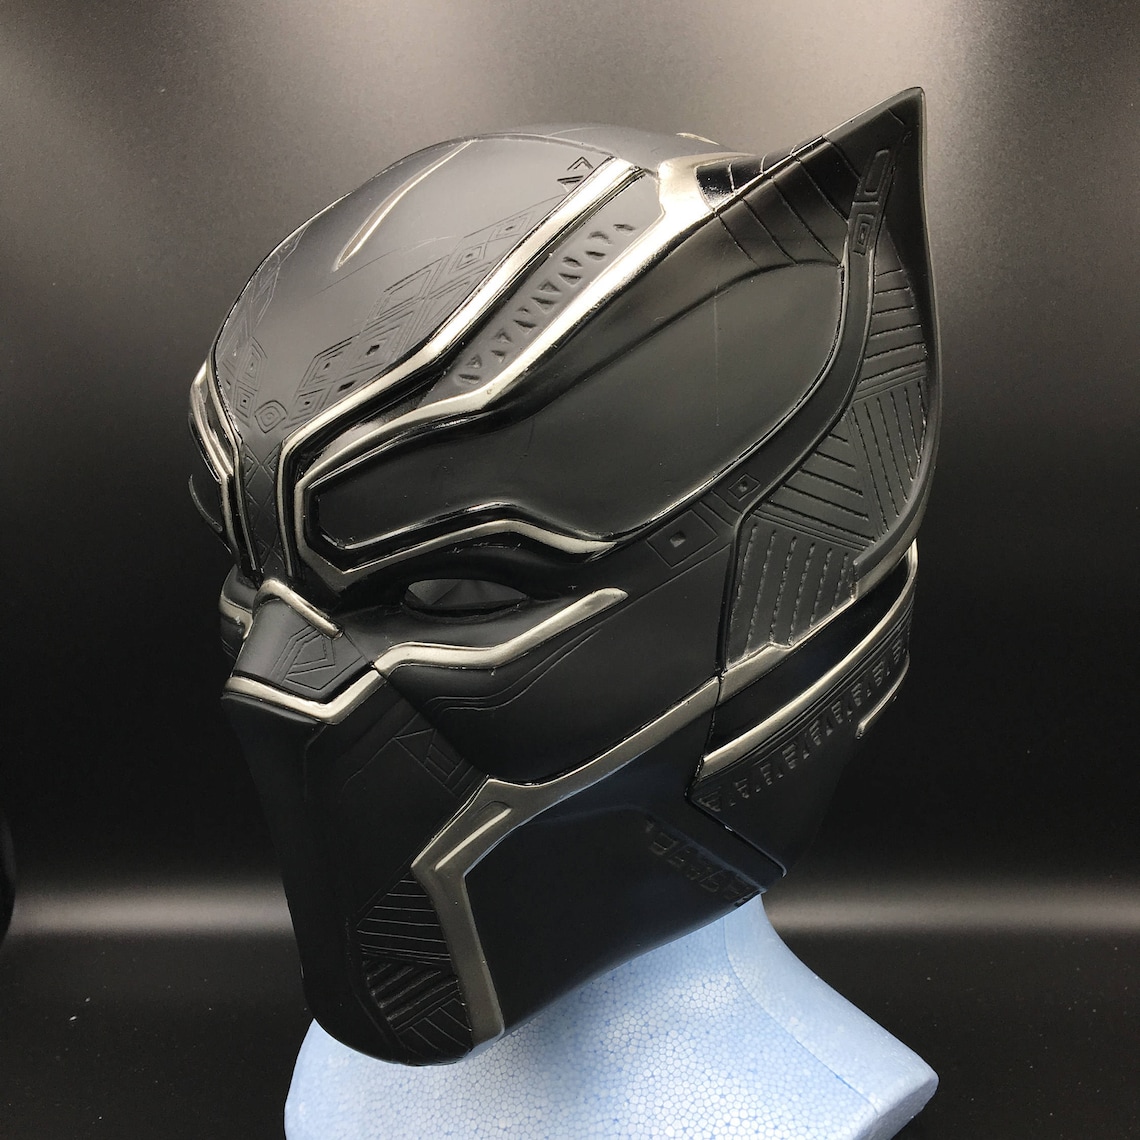 Black Panther Helmet Life-size Scale Fully Pattern Detail - Etsy